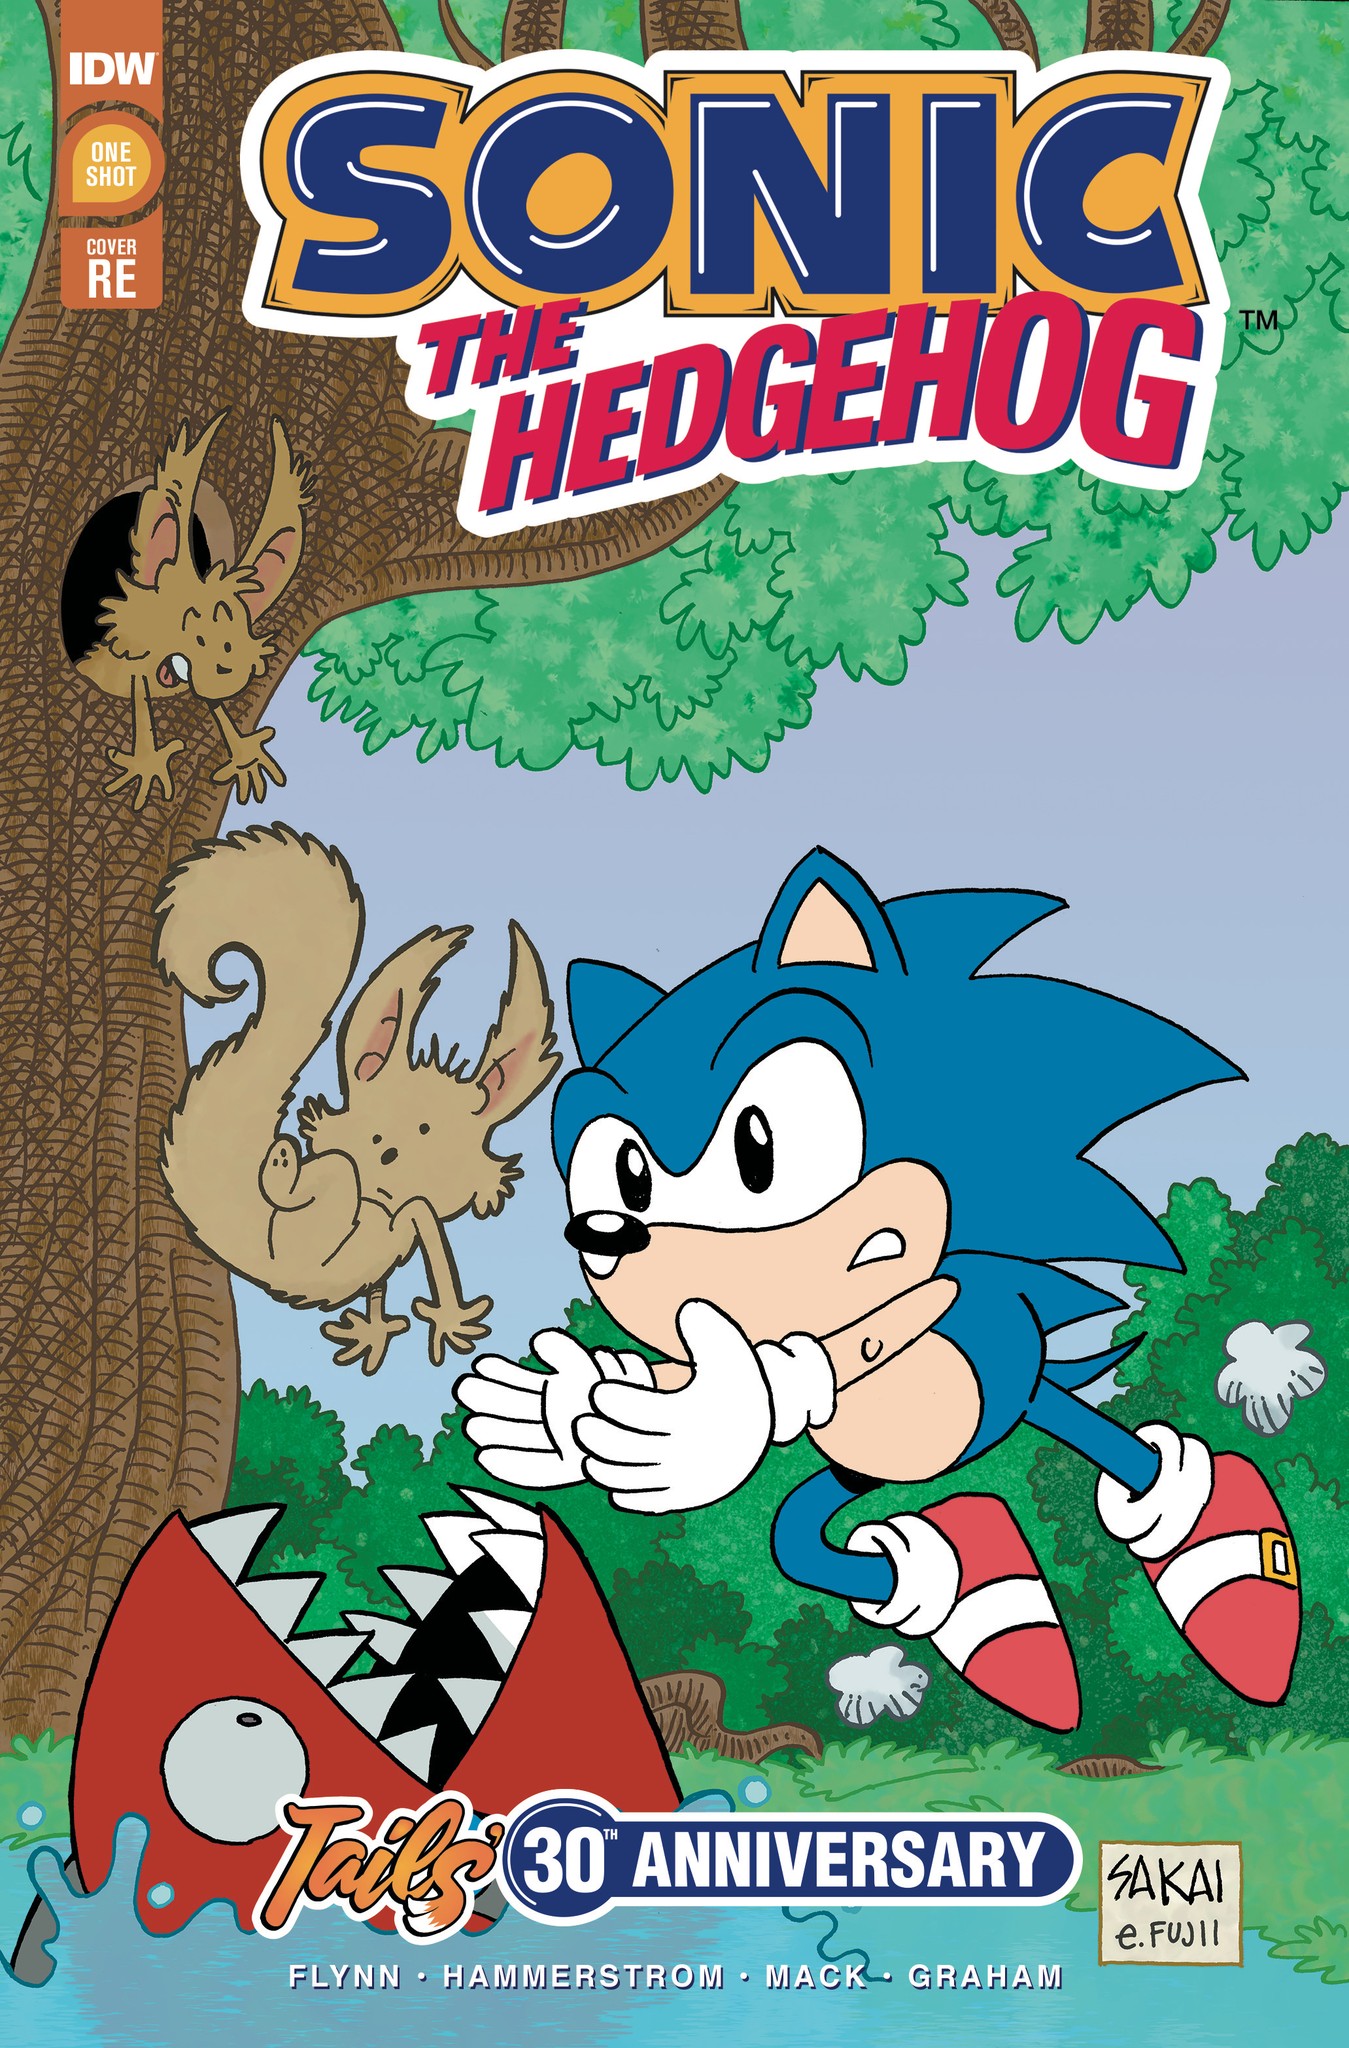 Sonic The Hedgehog (IDW Comics) - 5th Anniversary FOIL Online Exclusive New  NM